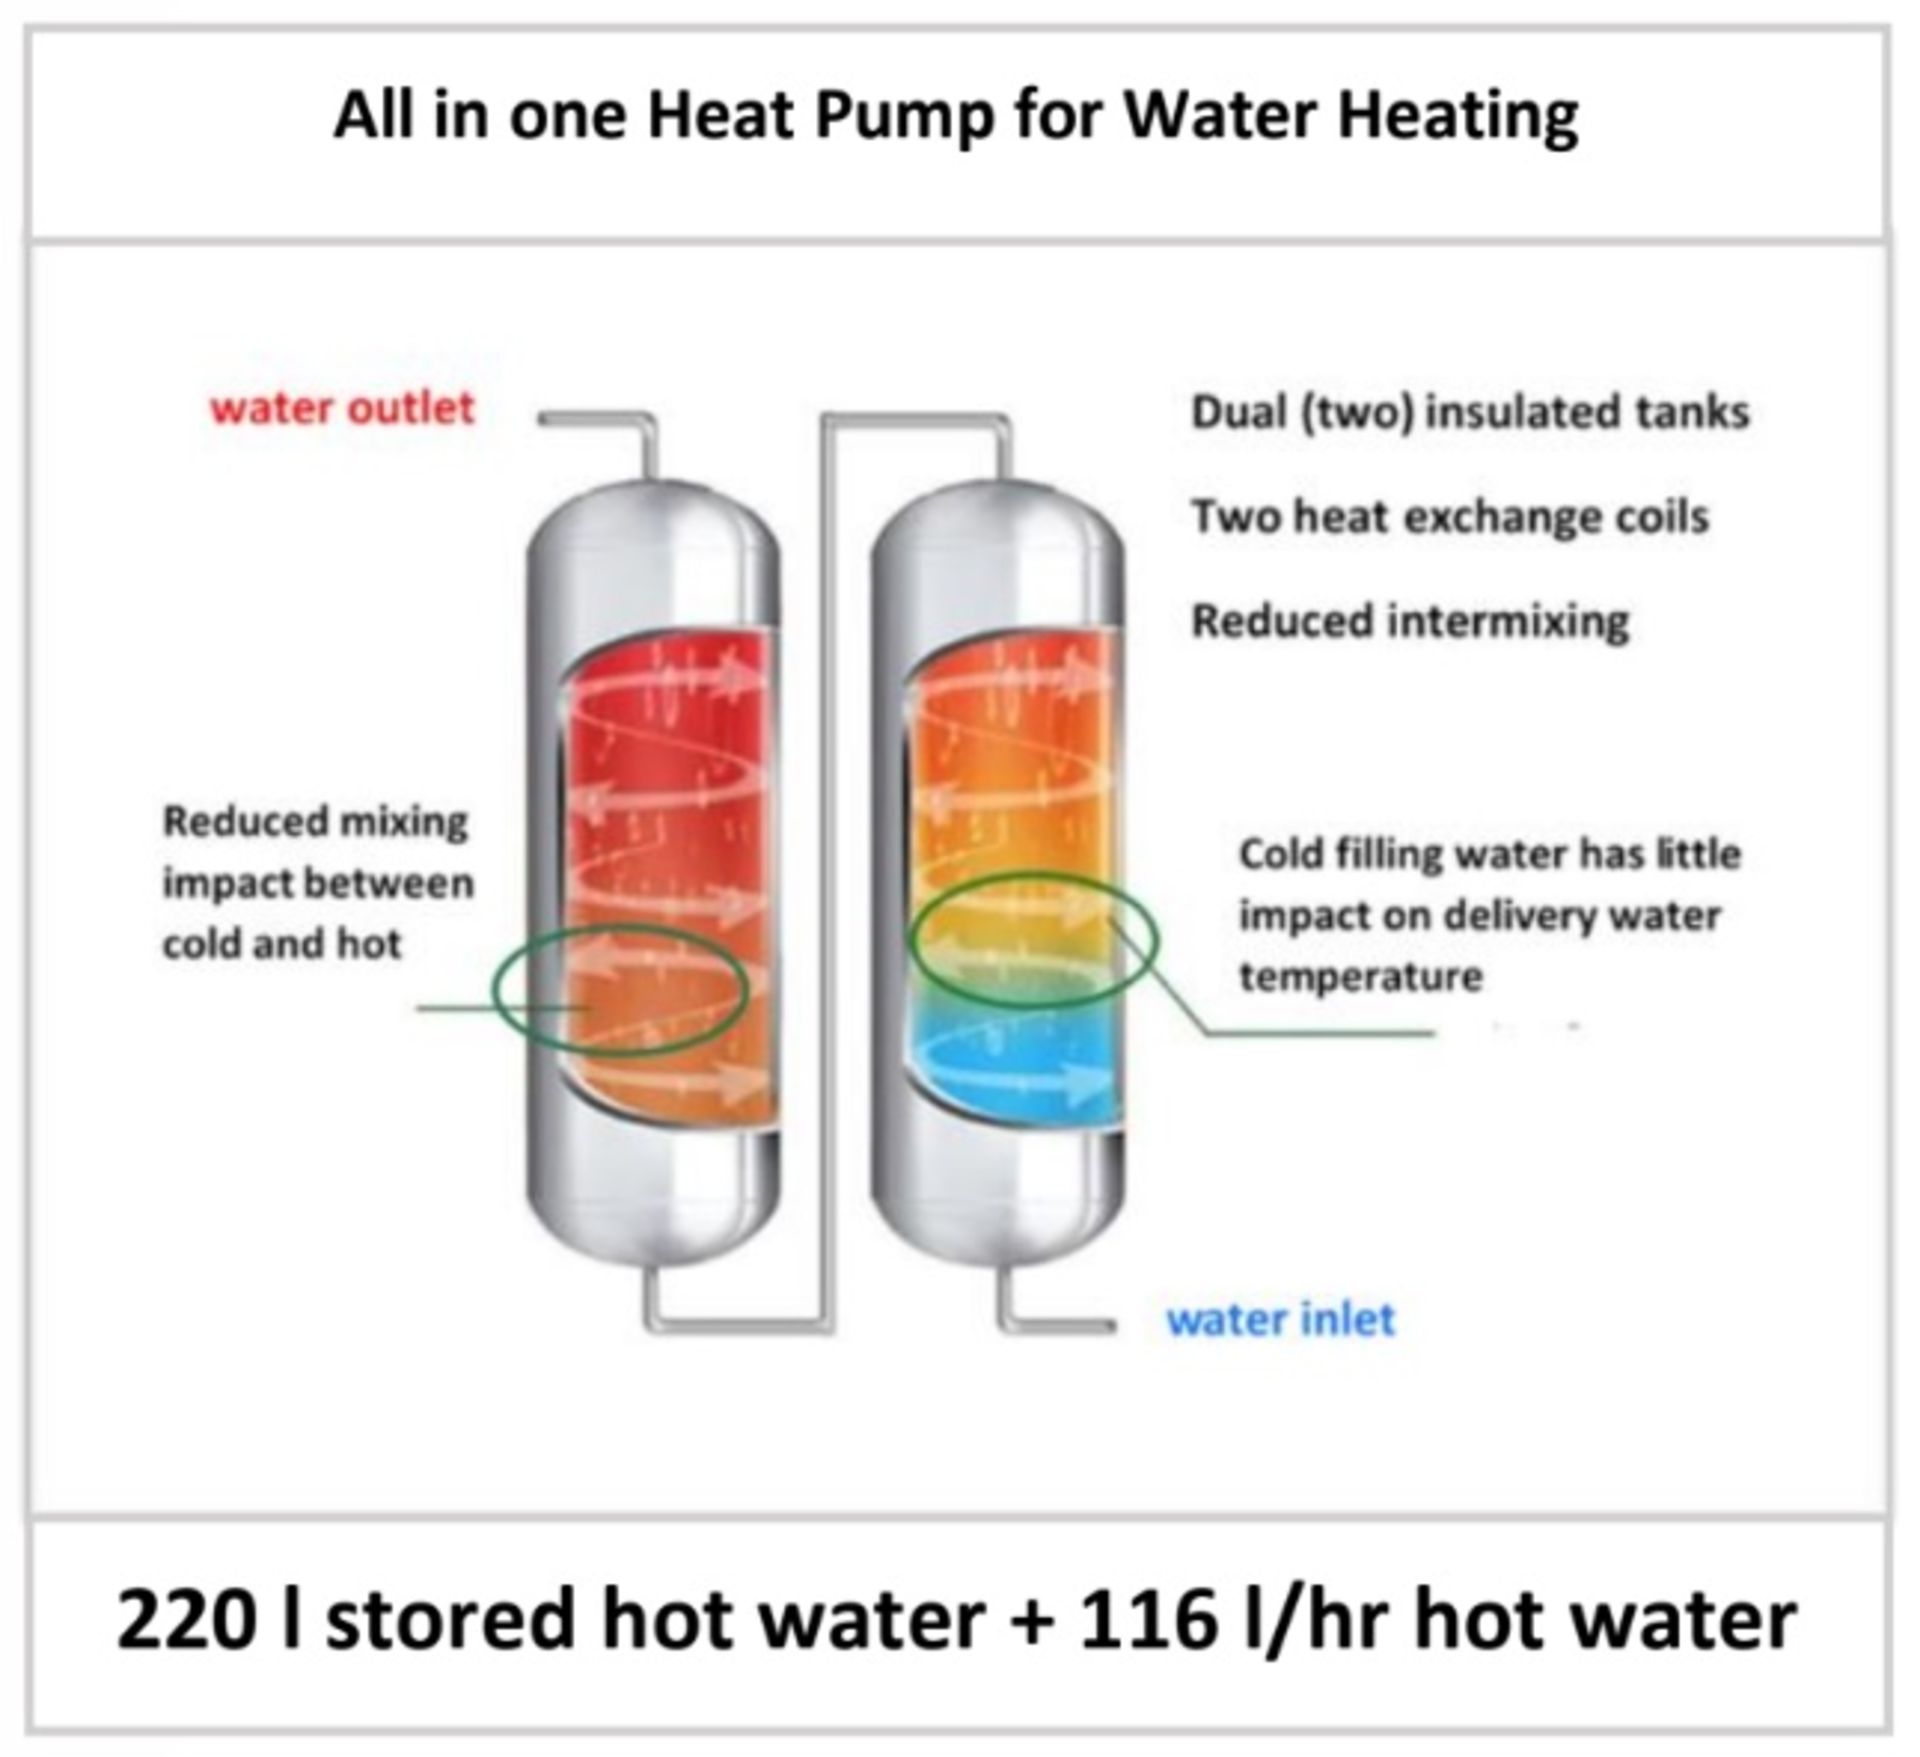 1 x REXMARTINS 'New-Energy 003' All-In-One Heat Pump Water Heater - Unused / Unboxed - Image 8 of 34